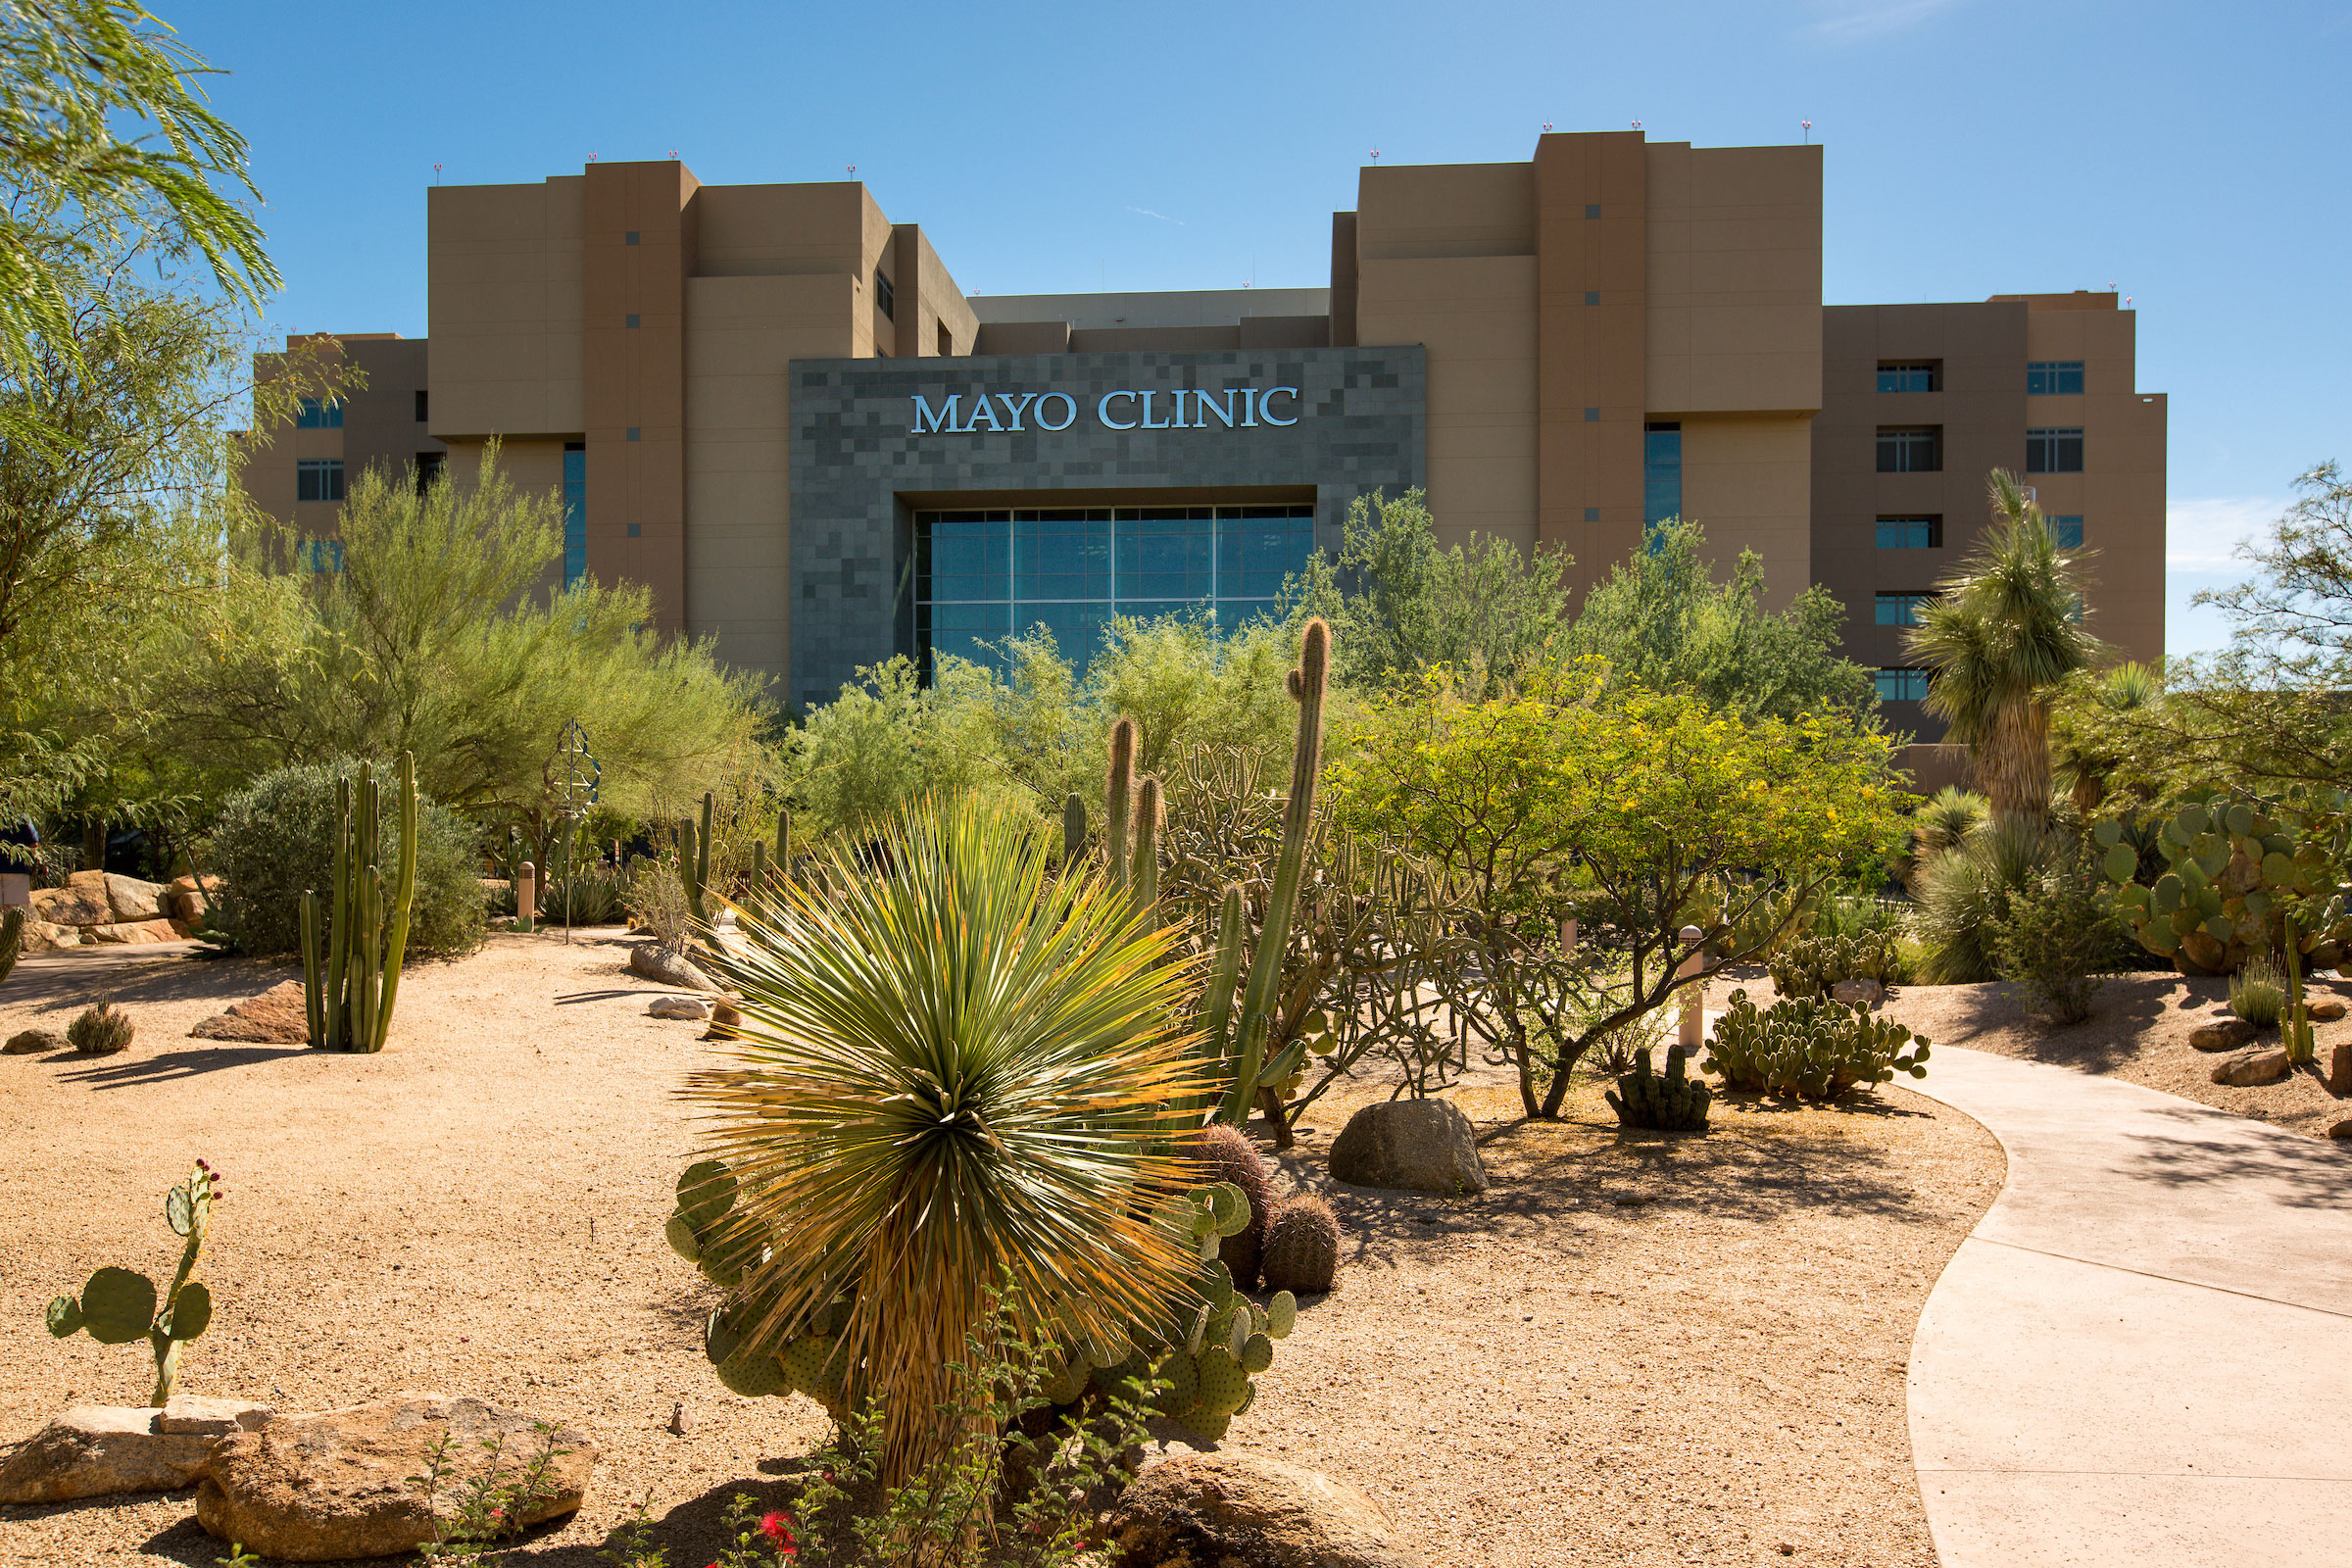 Exterior of Mayo Clinic building in Phoenix